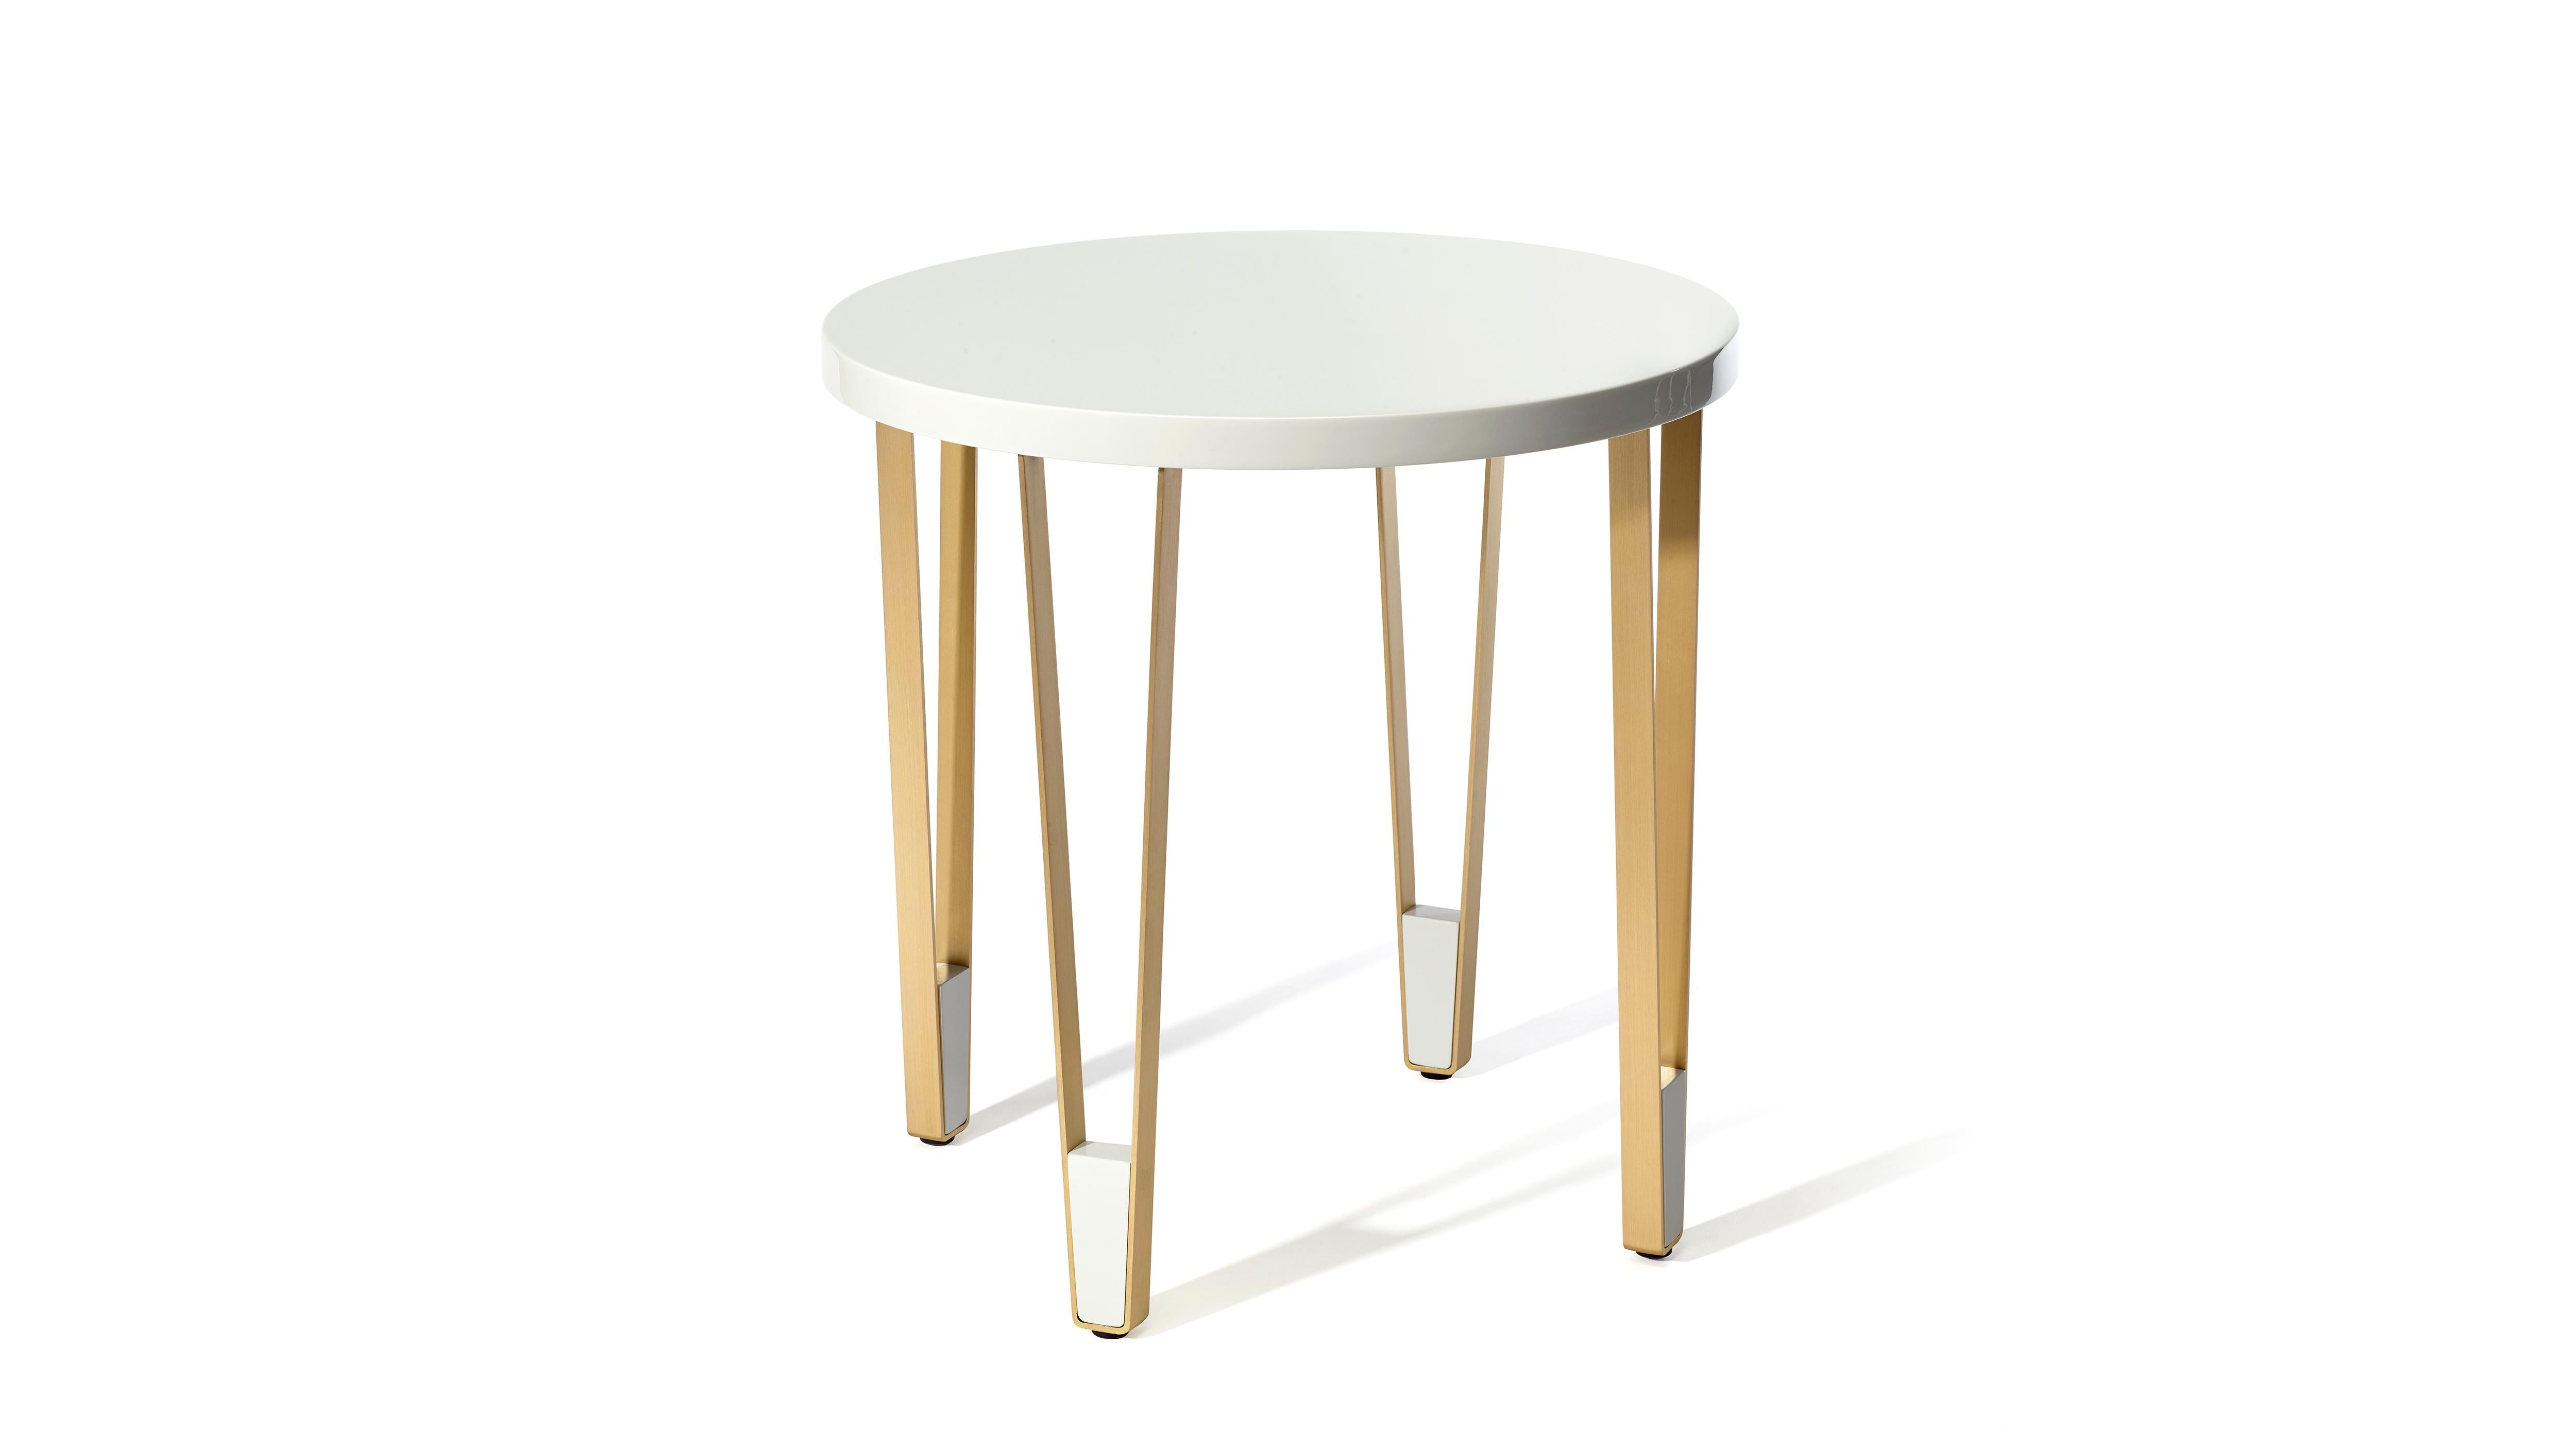 Ionic Round Side Table by InsidherLand
Dimensions: D 55 x H 55 cm.
Materials: White lacquered, brushed brass.
10 kg.
Other materials available.

Ionic is one of the three orders of classical architecture developed at the ancient Greek temples.